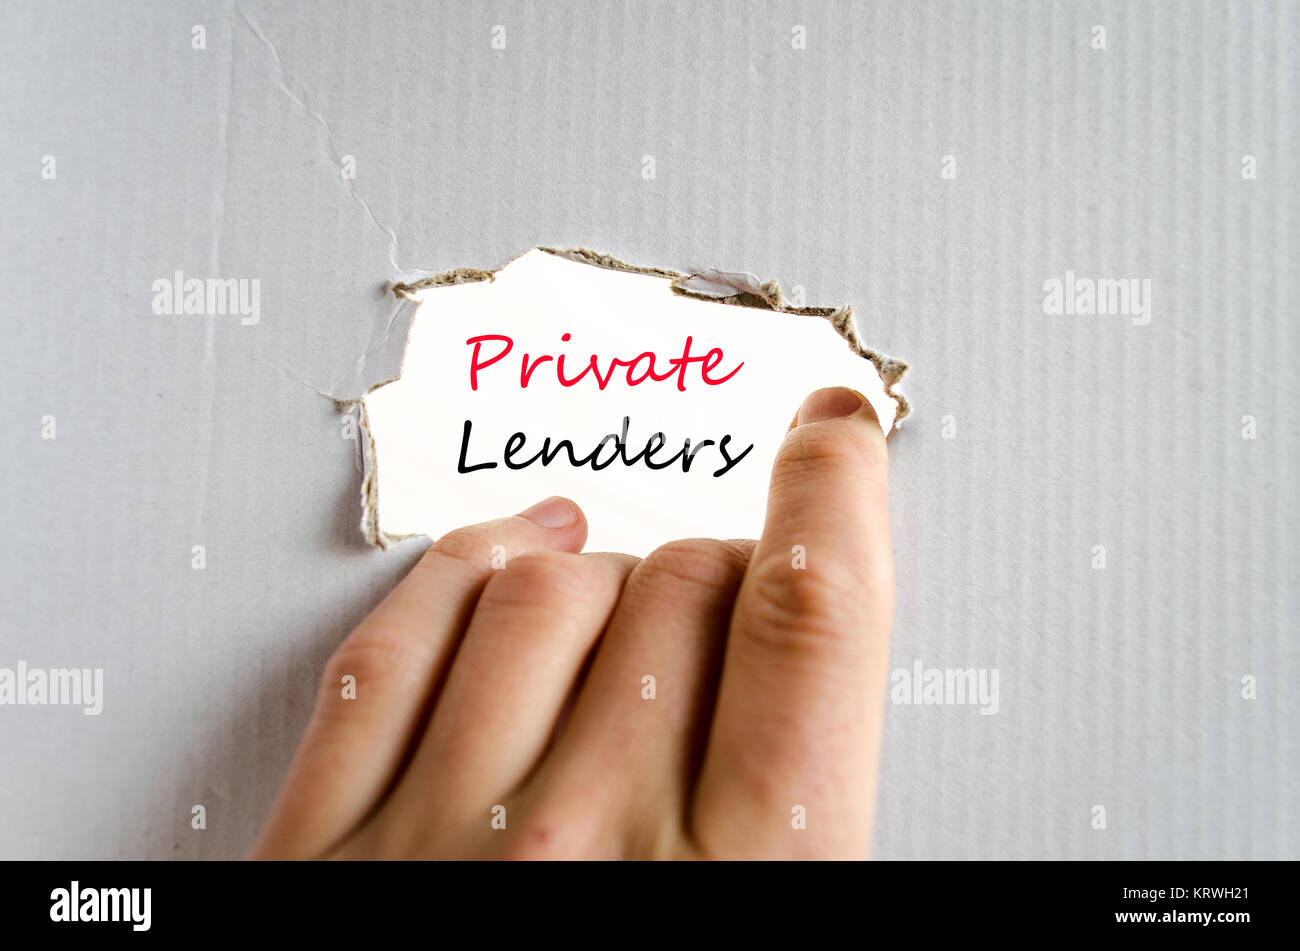 Private lenders text concept Stock Photo